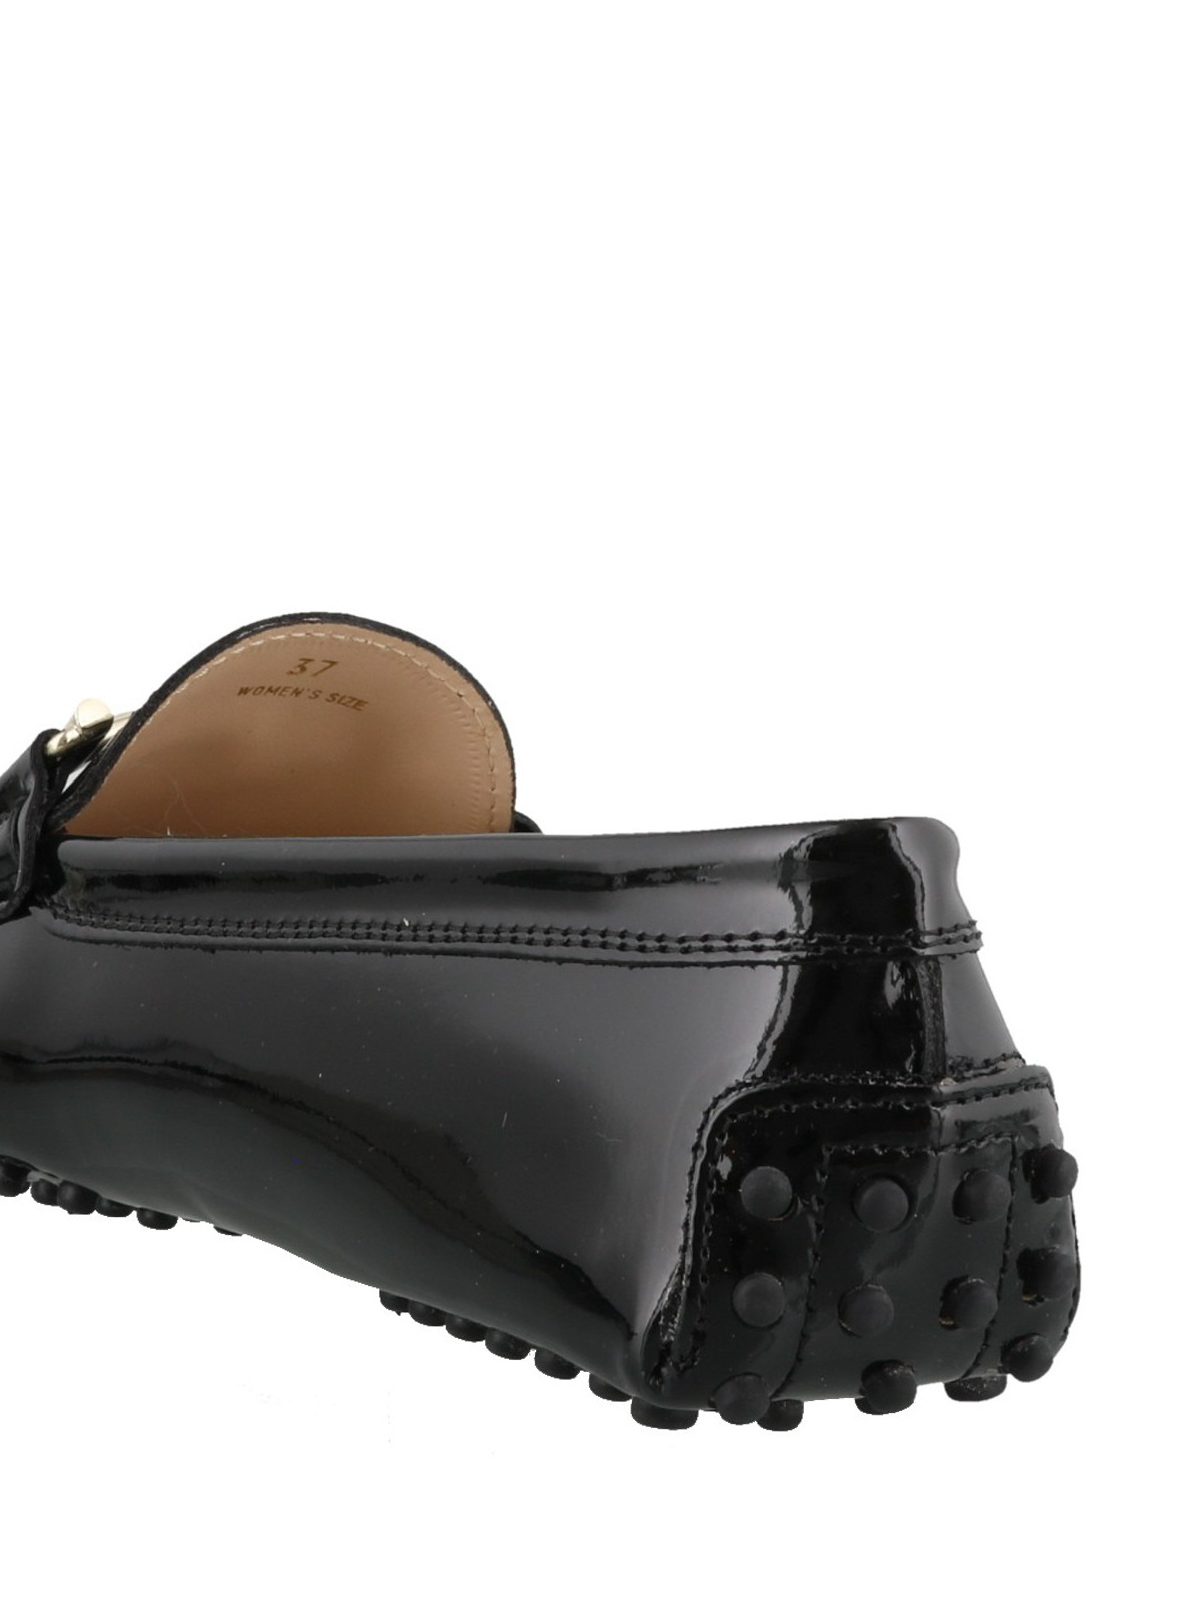 Speciaal Kwijtschelding Voorstel Loafers & Slippers Tod'S - Double T Gommino patent leather driving shoes -  XXW00G0Q4990W09999